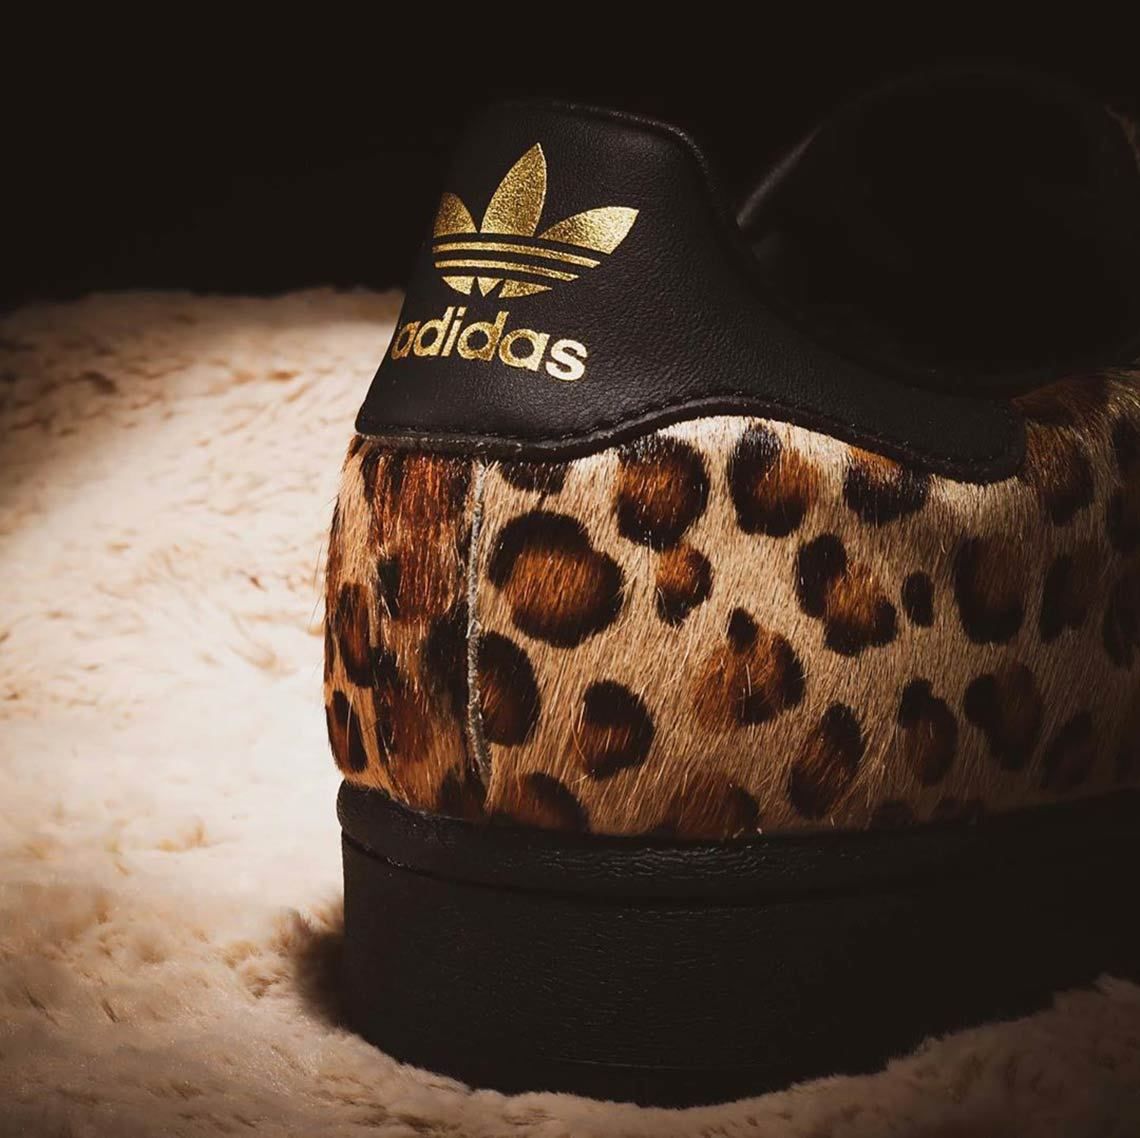 atmos and adidas the Superstar - Sneaker Freaker